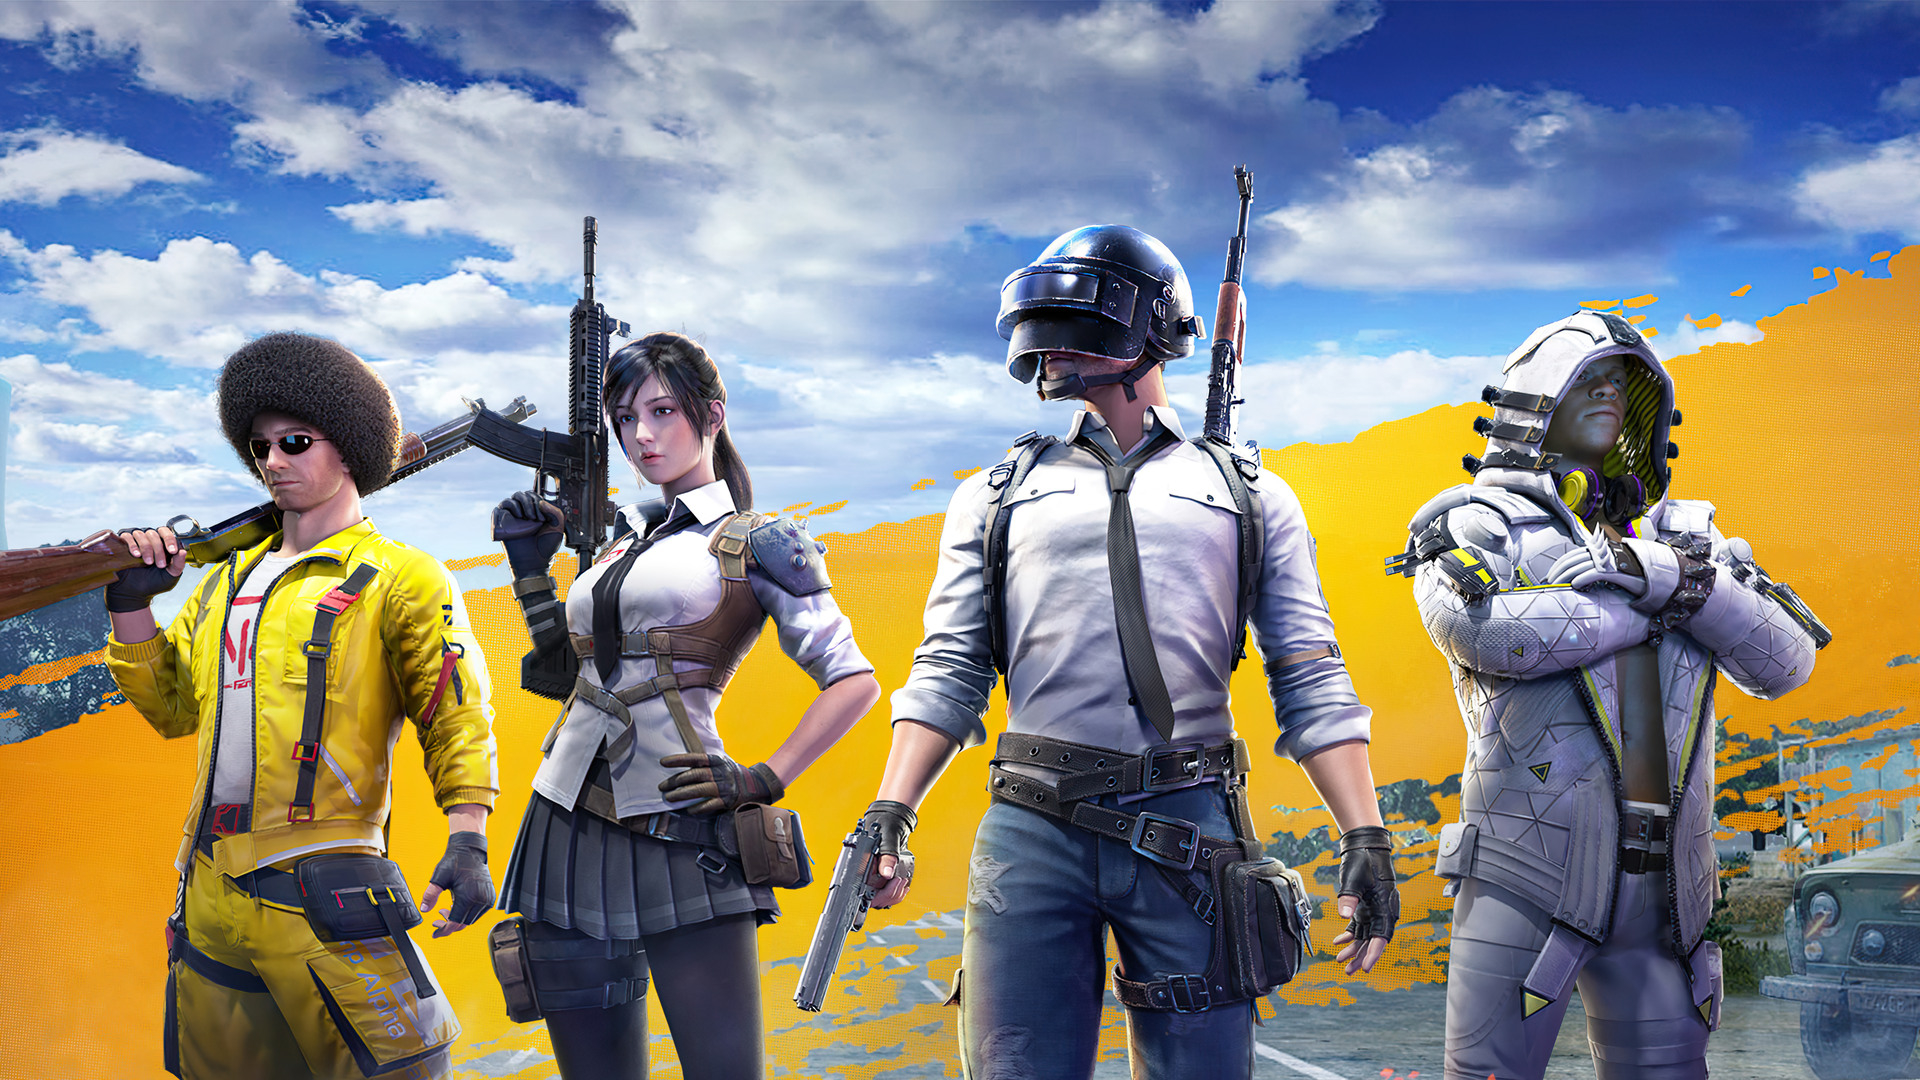 3840x Pubg Mobile Season 8 3840x Resolution Wallpaper Hd Games 4k Wallpapers Images Photos And Background Wallpapers Den